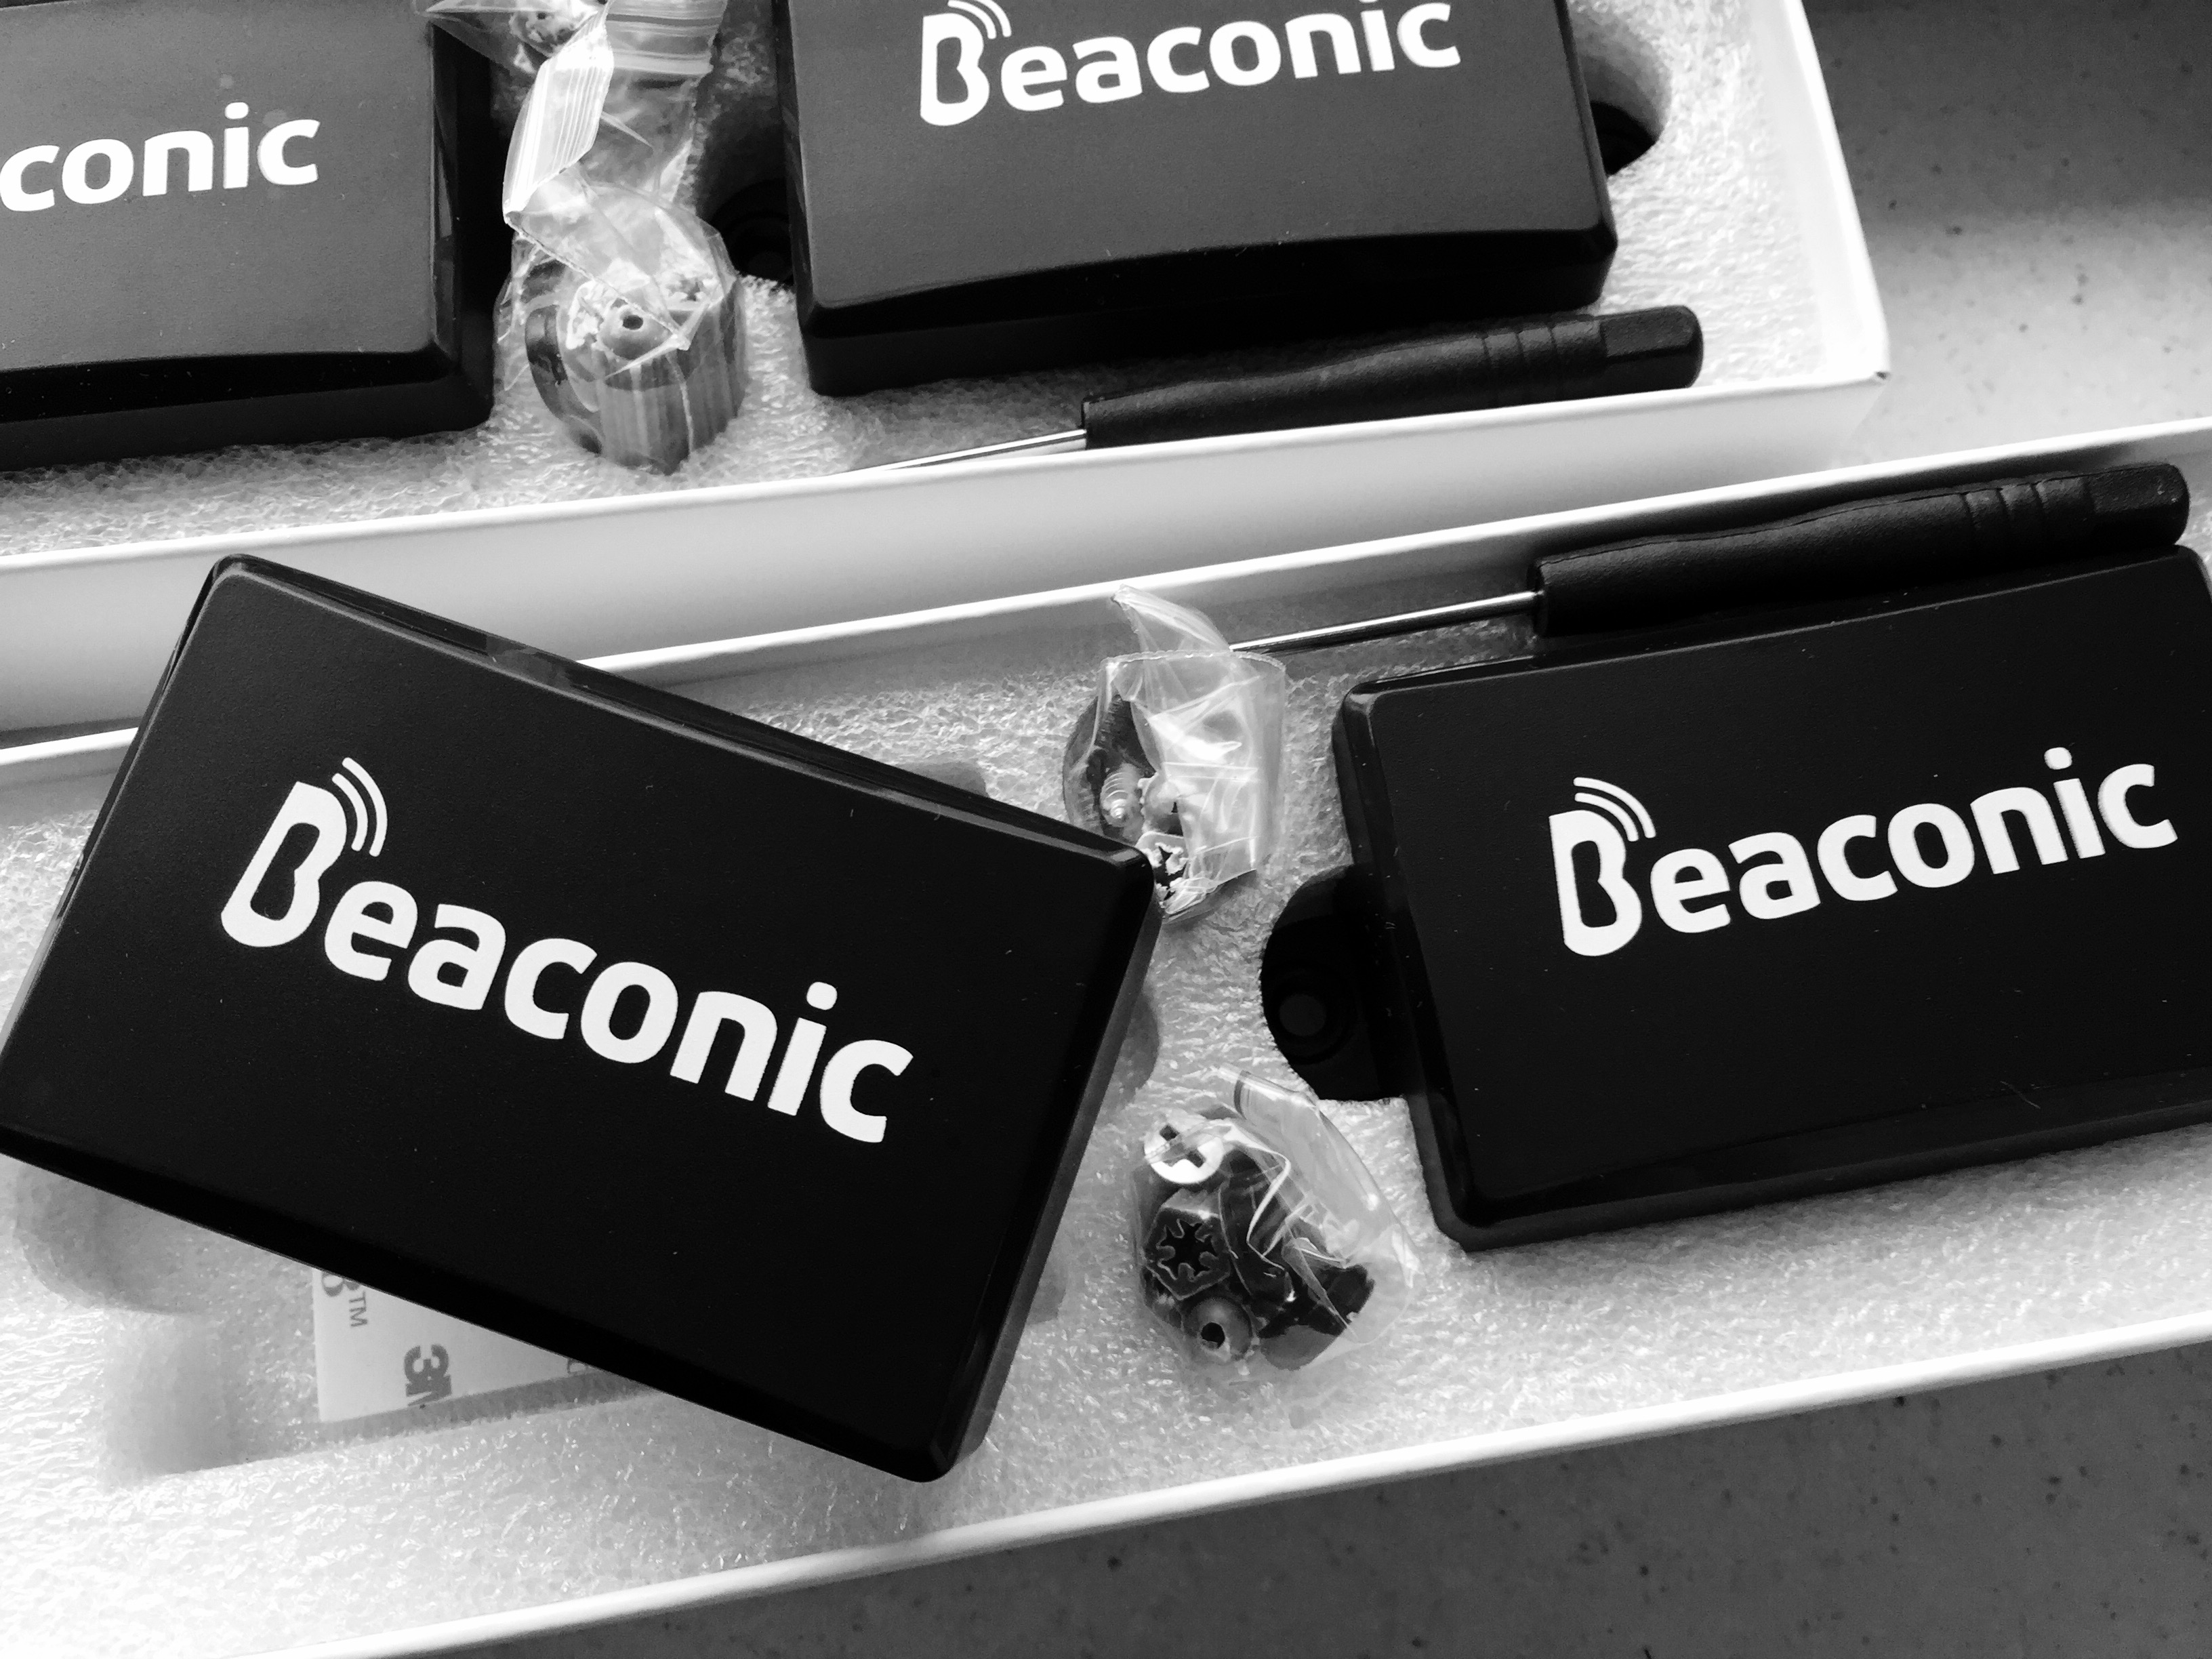 Next-generation POWER iBeacon added to Beaconic product line